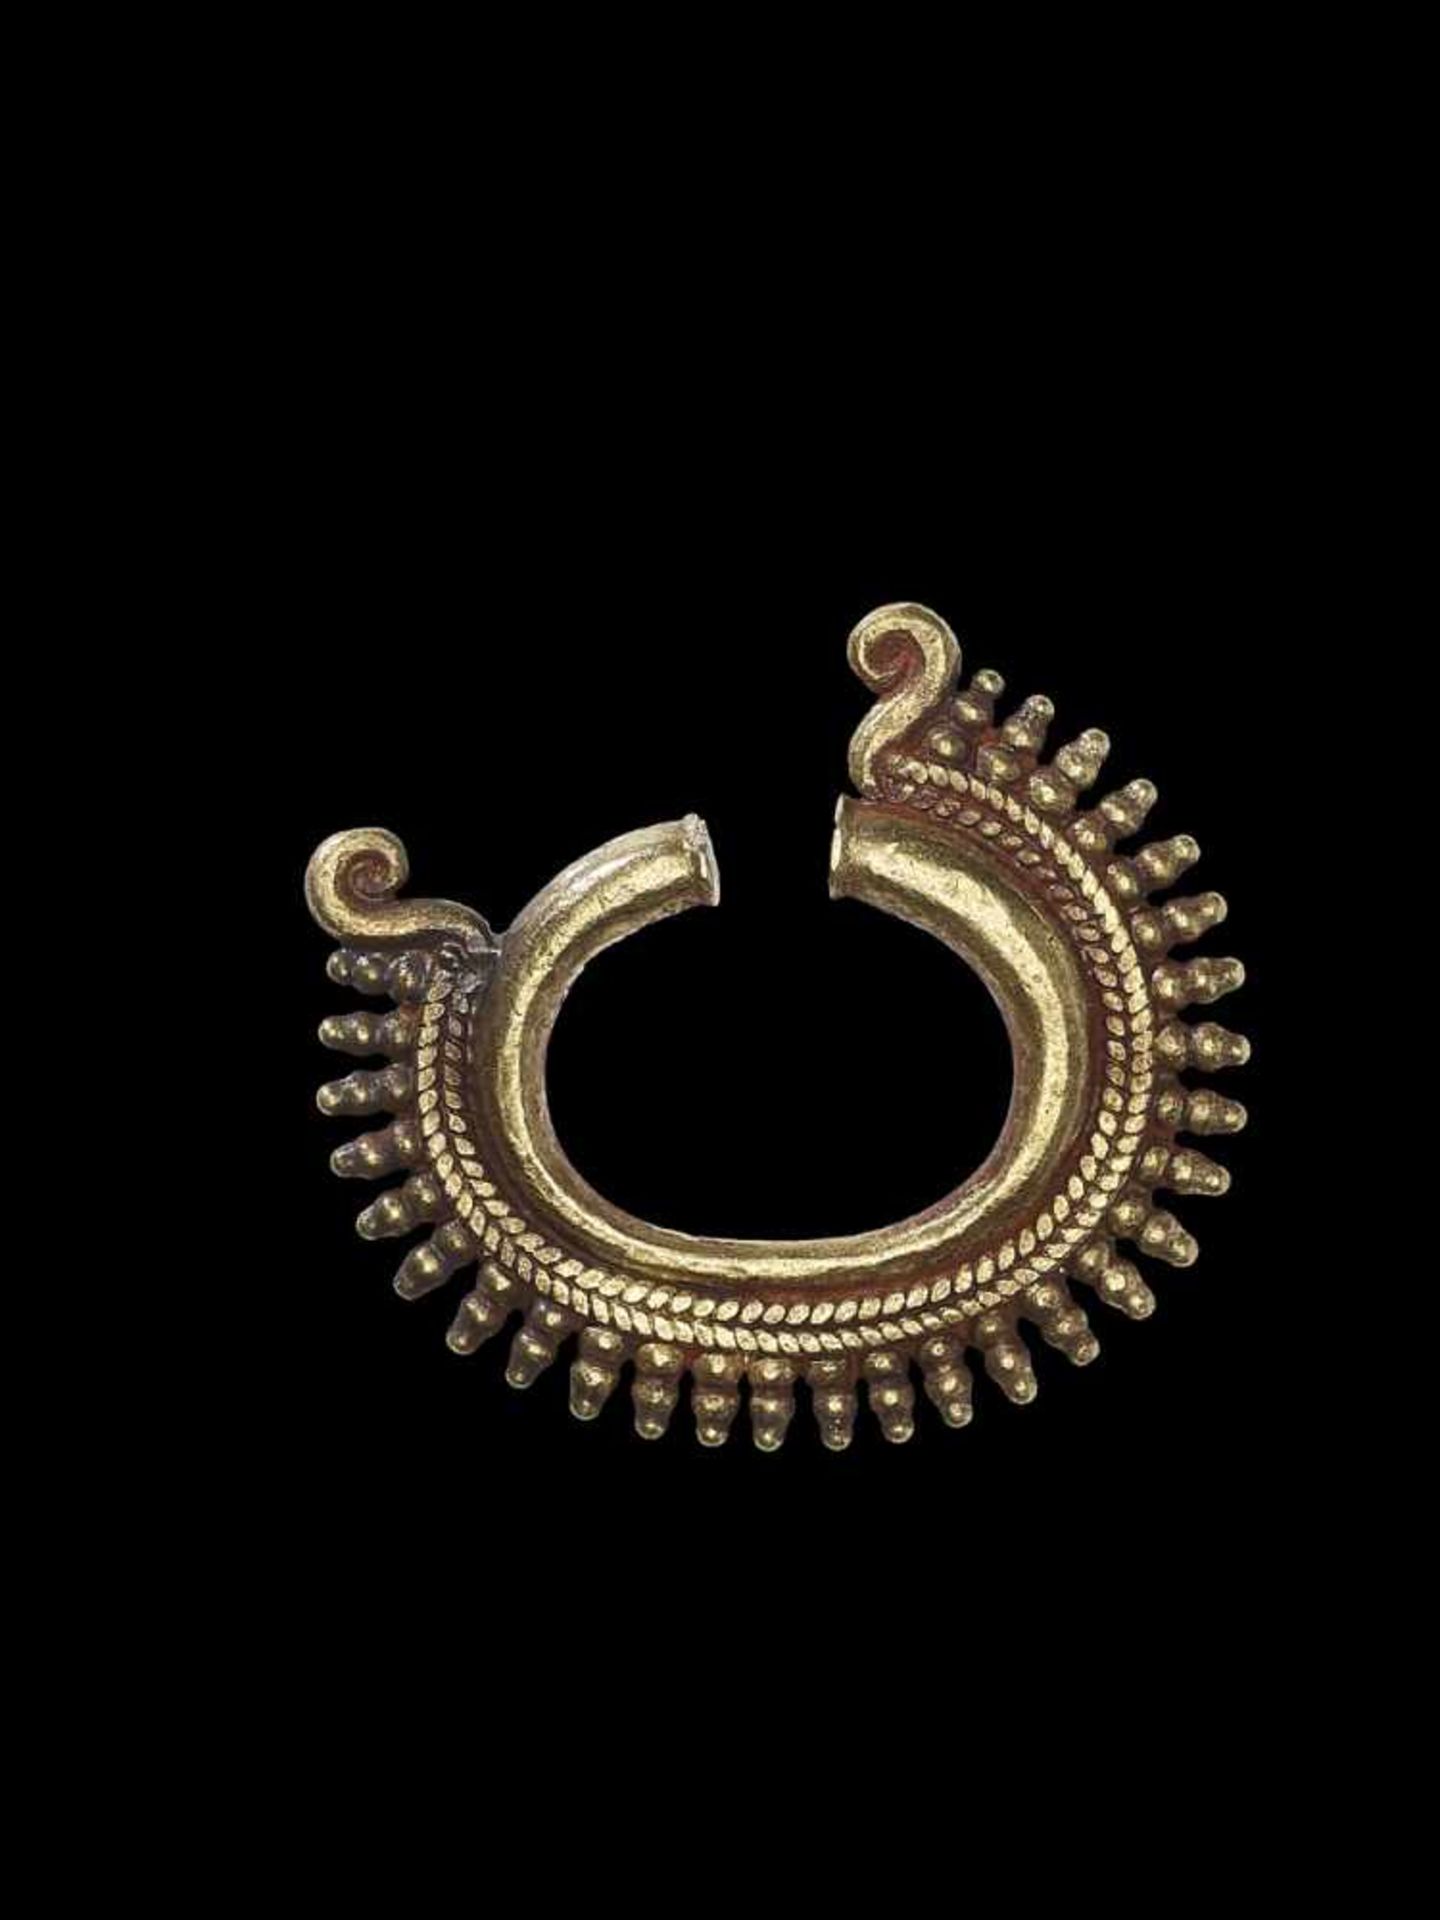 A PAIR OF OPEN RING-SHAPED MINDANAO GOLD EAR ORNAMENTS Philippines, Mindanao, 8th – 13th century. - Image 3 of 4